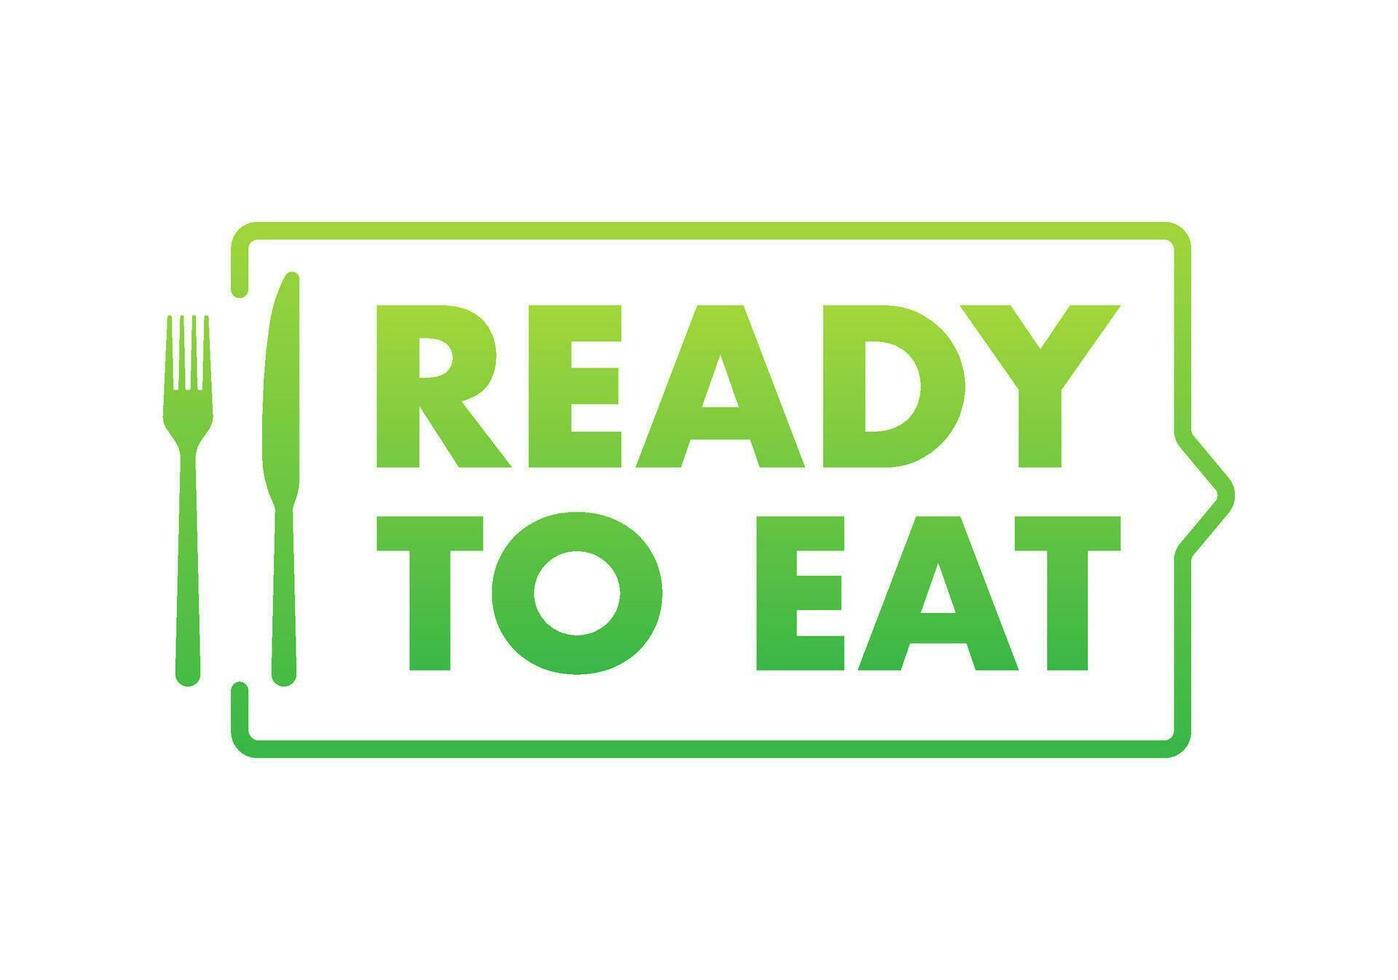 Ready to eat meal sign, label. Precooked food. Vector stock illustration